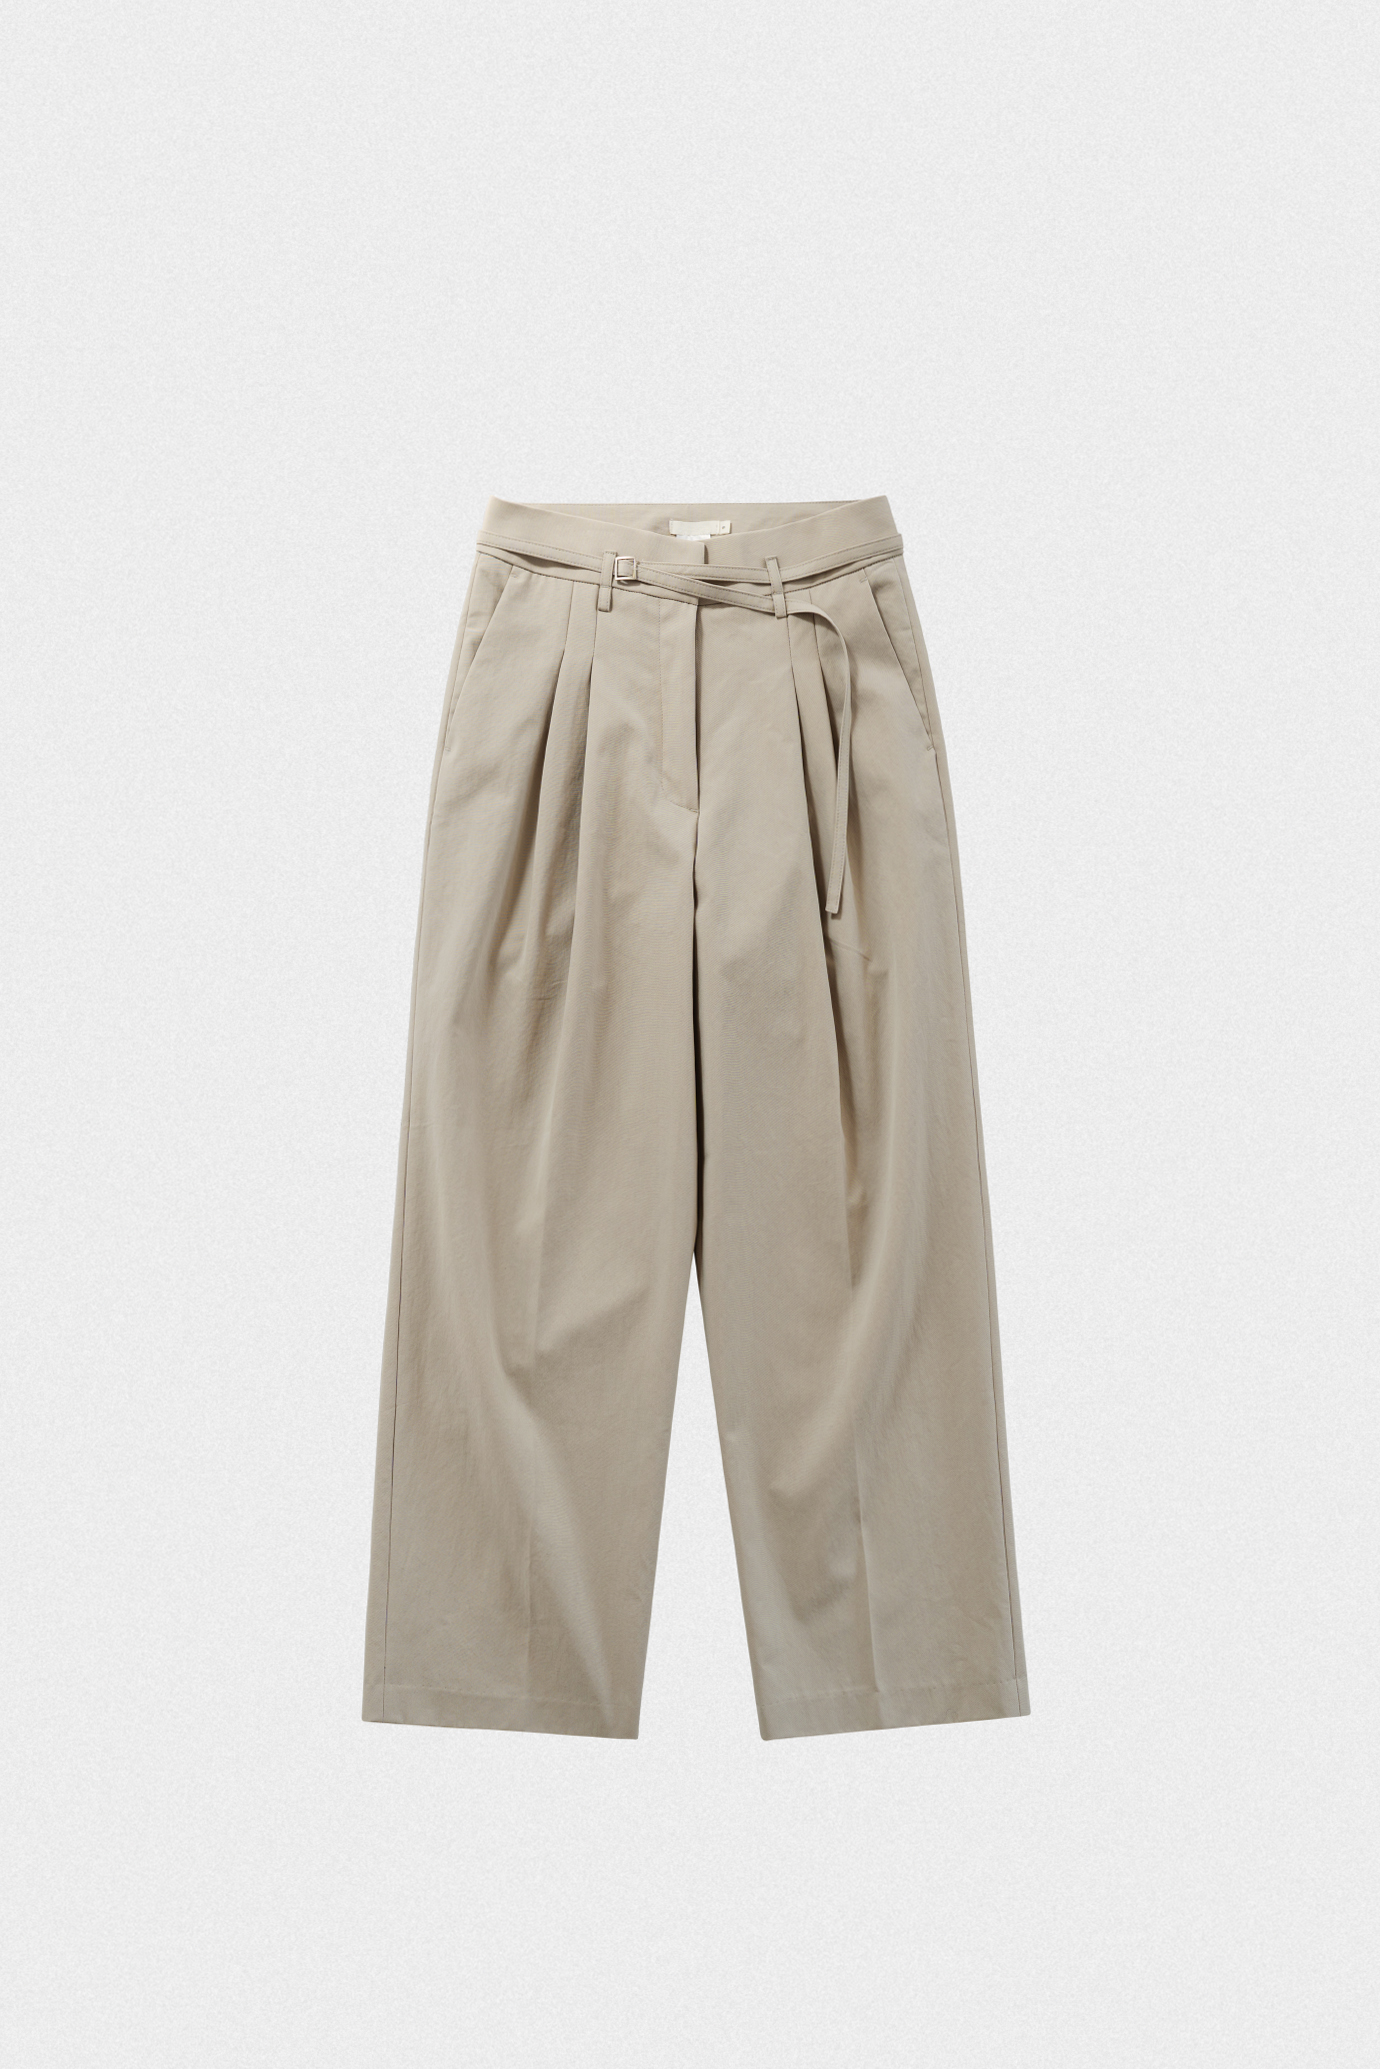 19866_Belt Tailored Trousers [ow]